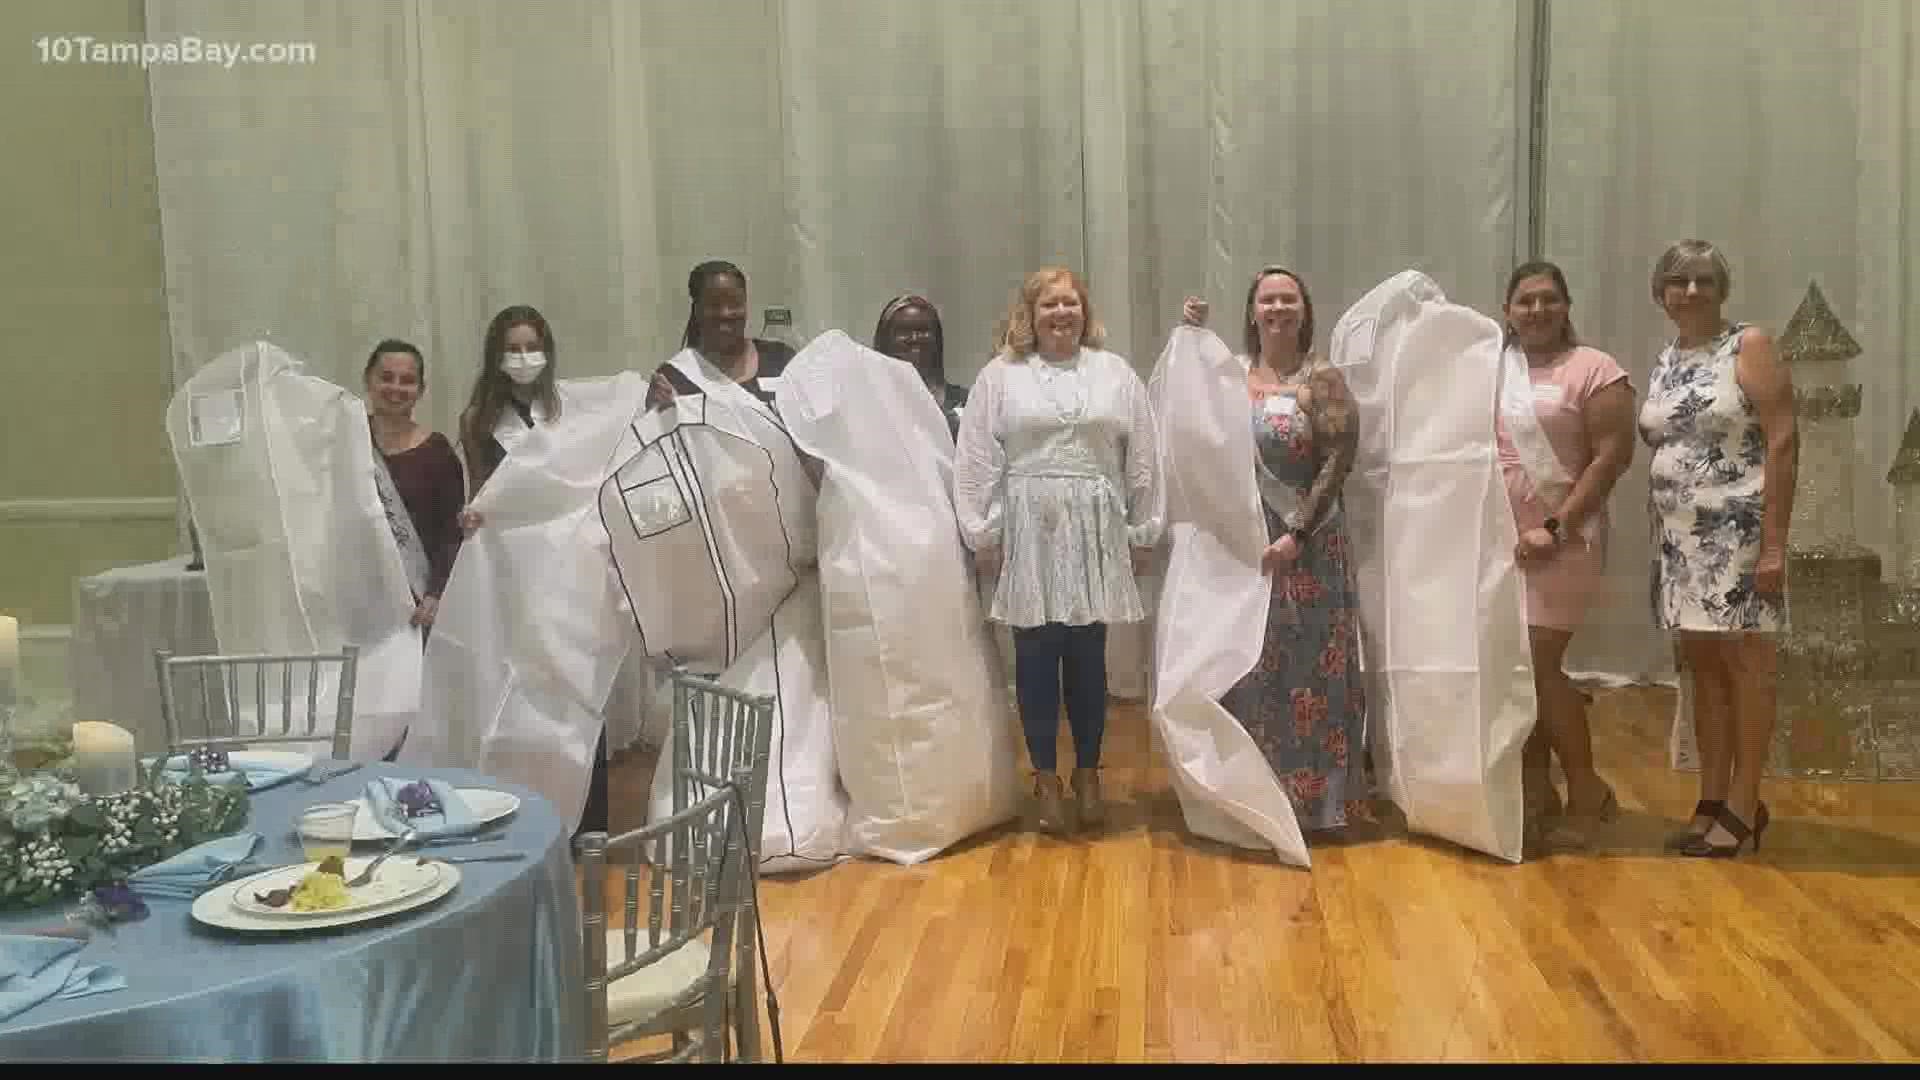 Shannon Keil gave away gowns to brides-to-be who work in hospitals around Tampa Bay after surviving her own COVID-19 battle.